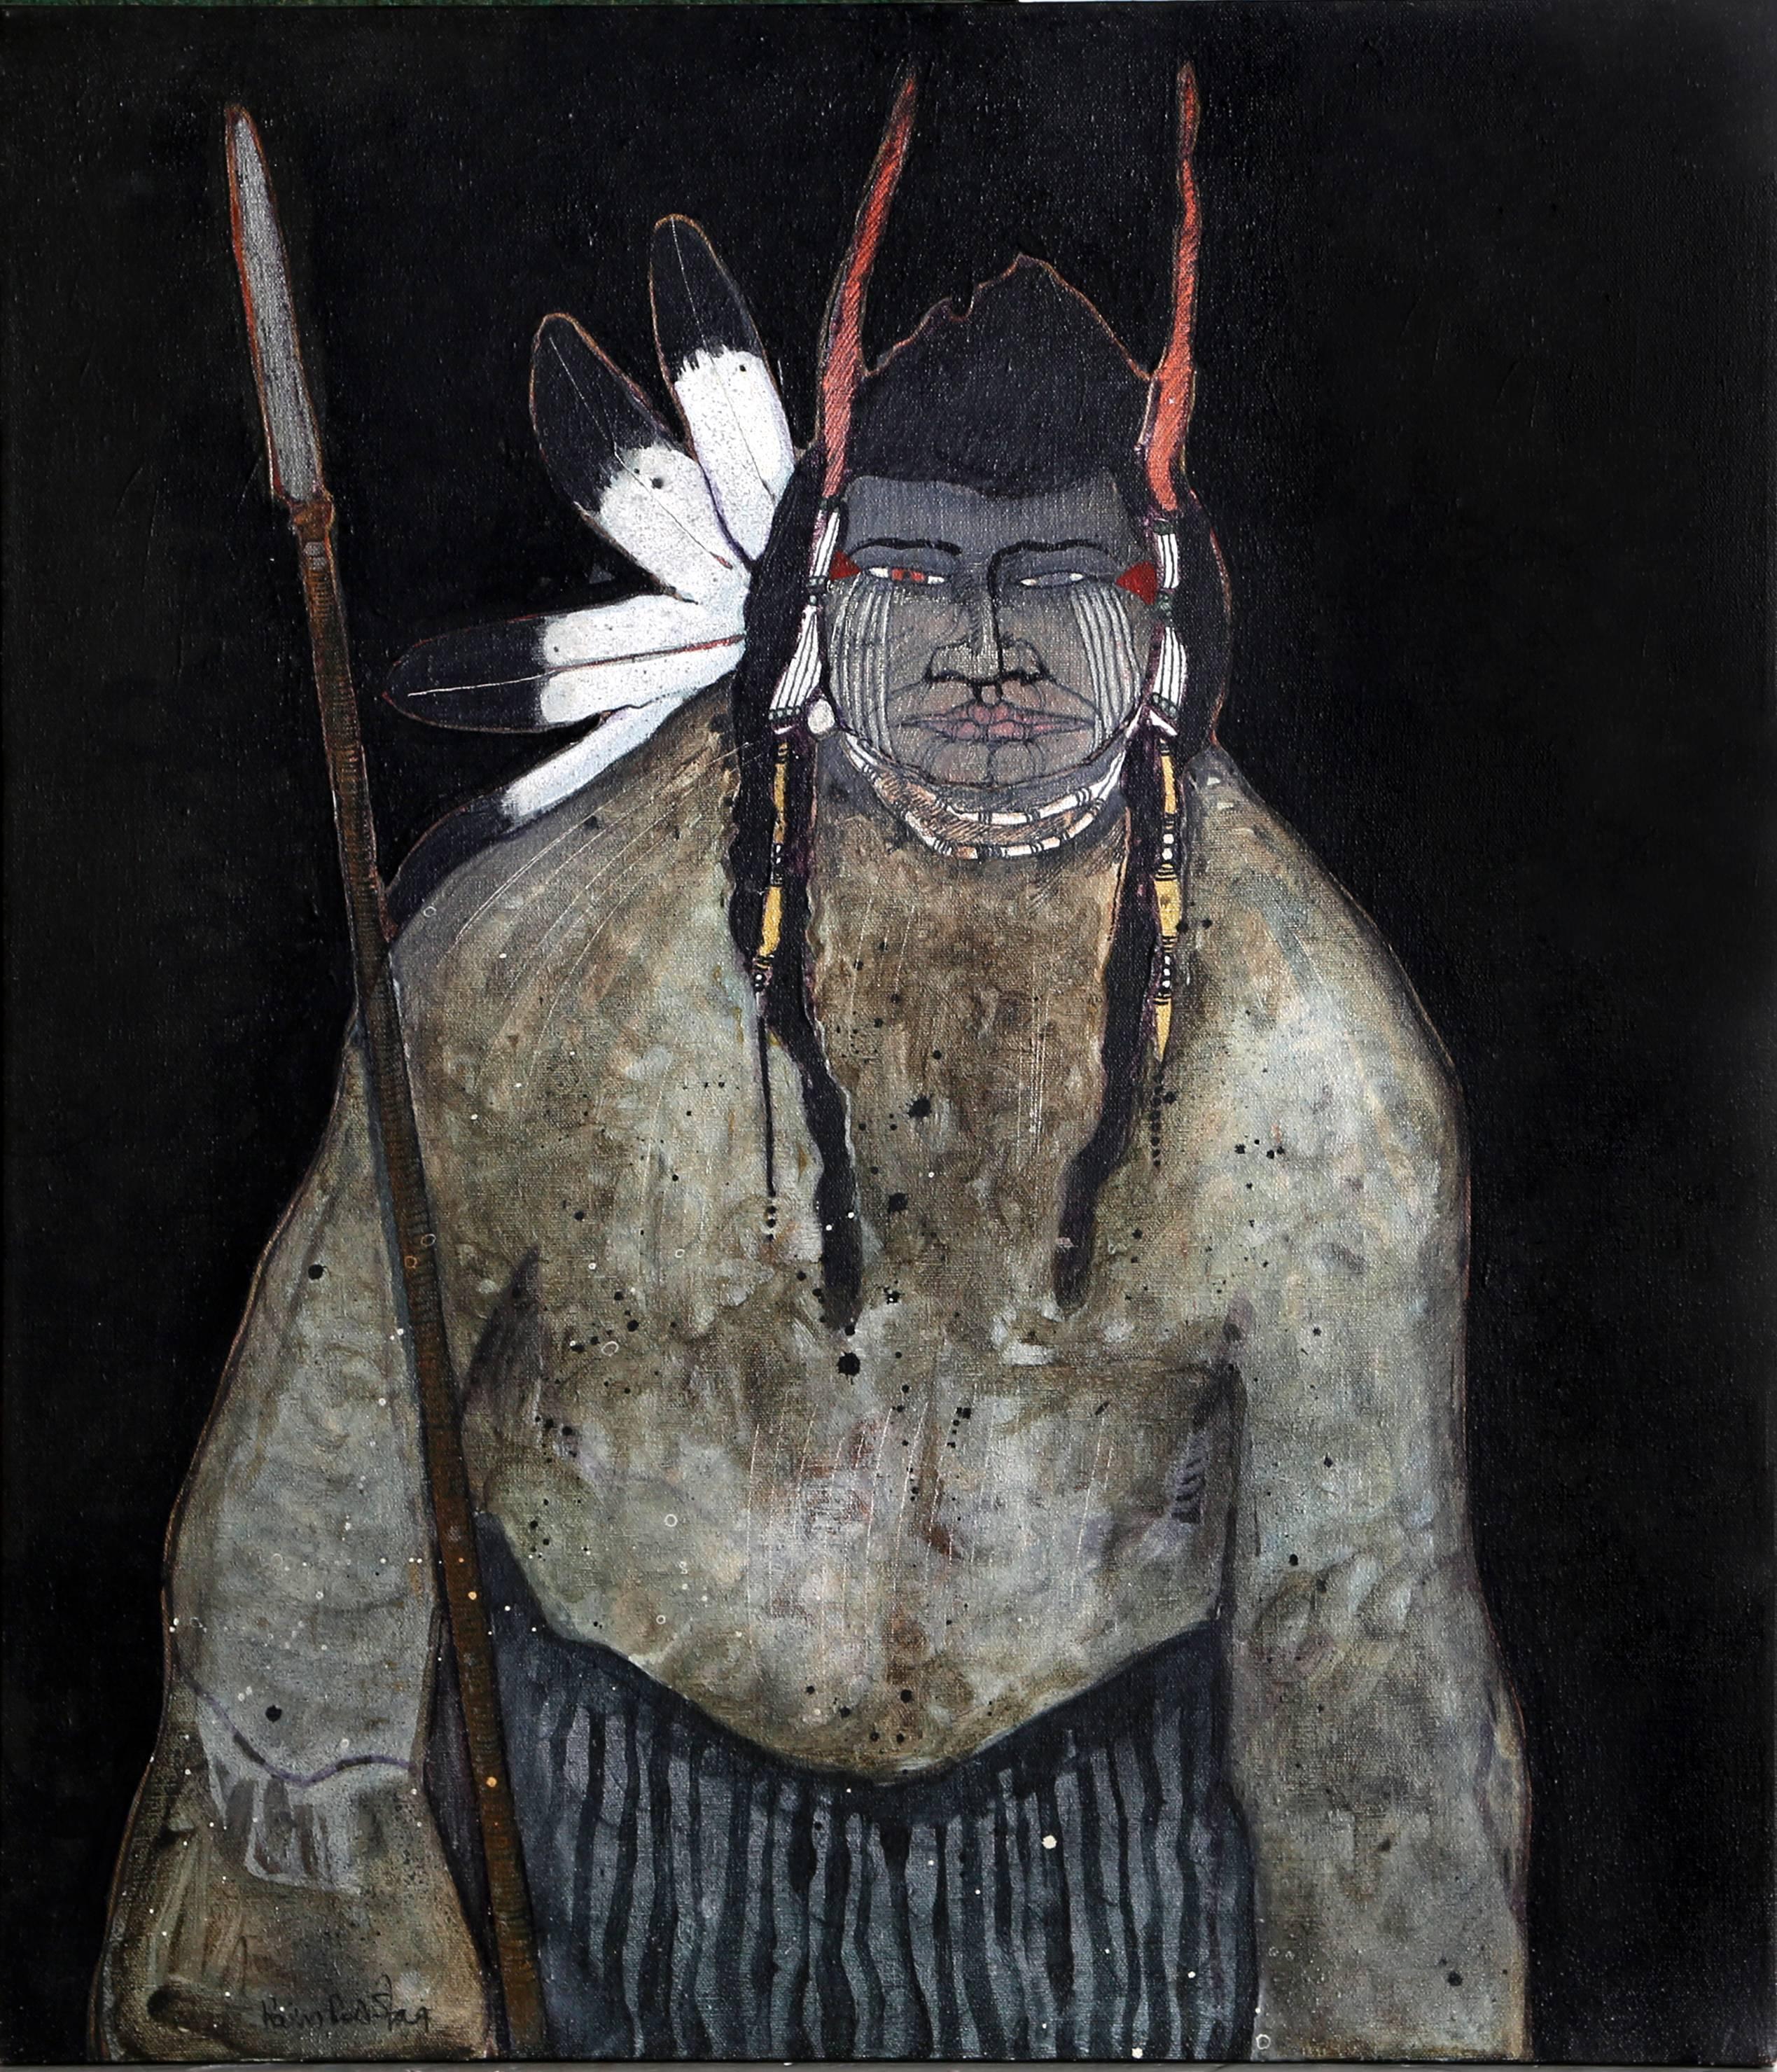 Figurative Painting Kevin Red Star - Crow Indian with Spear (Inde Crow avec lance)